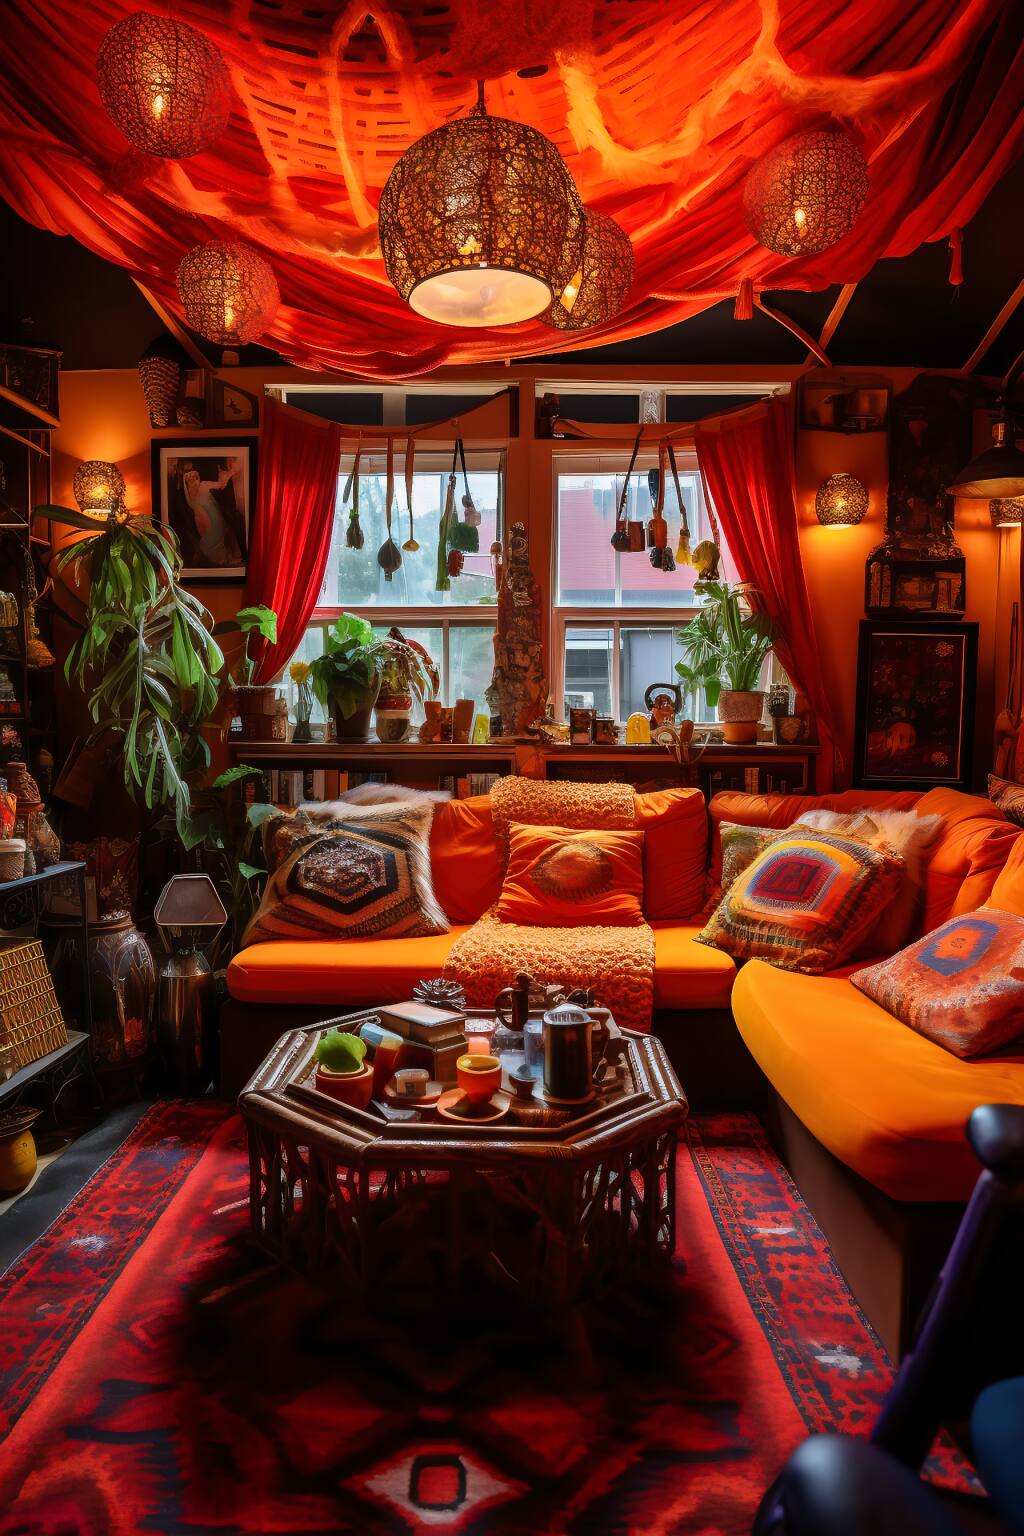 Bohemian Living Room In Orange And Gold, Featuring A Plush Sectional, Wooden Center Table, And Persian Rug.